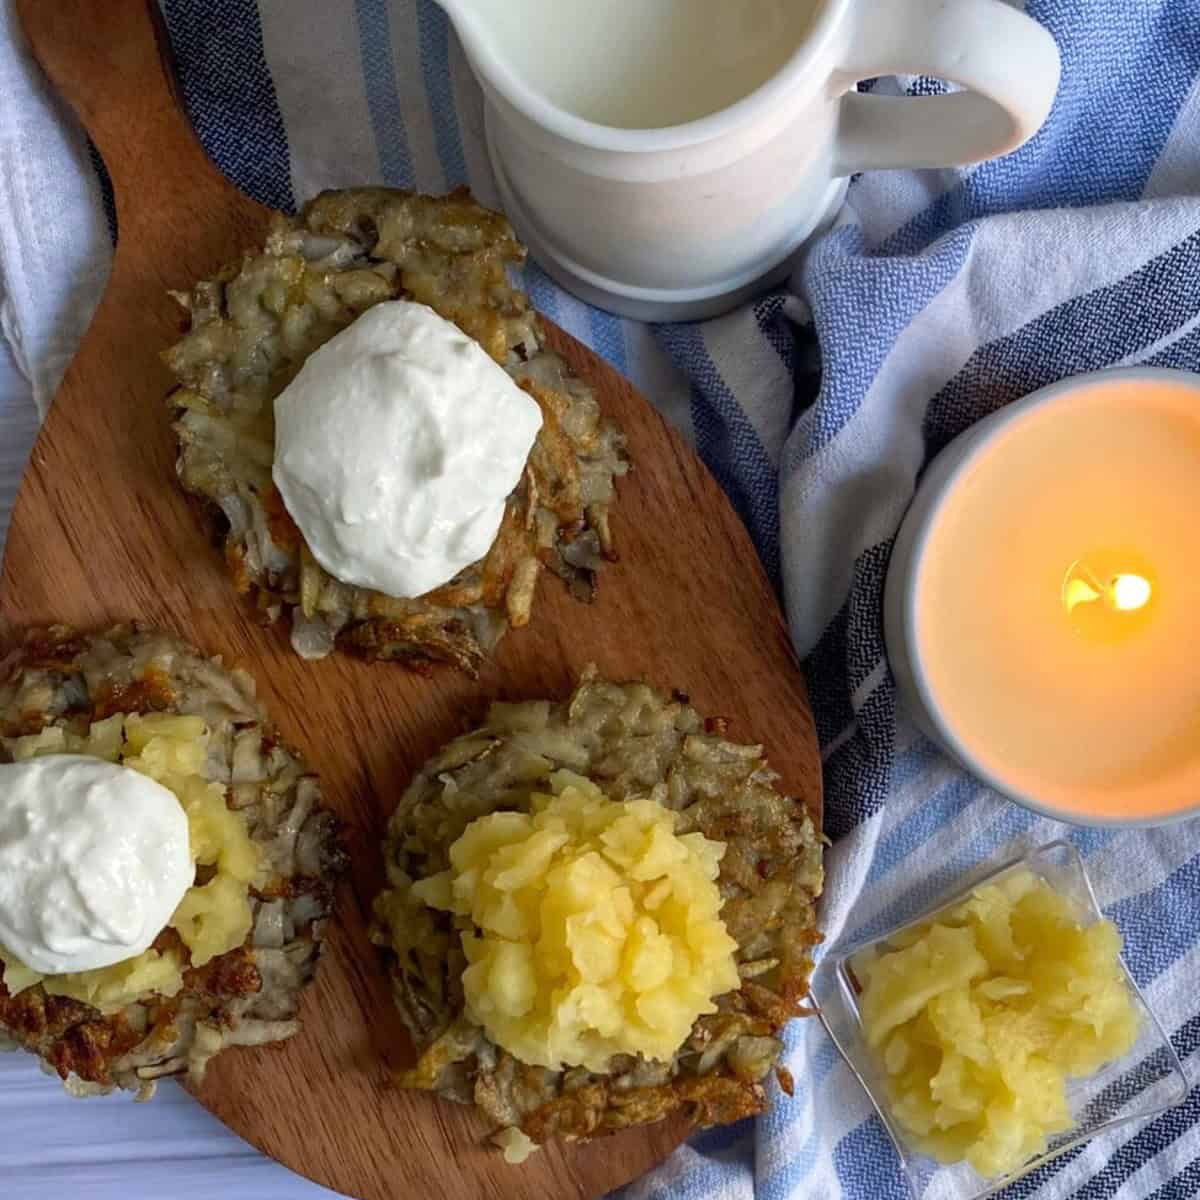 A close-up of a plate filled with three gluten-free potato latkes. The latkes are circular and golden brown with a slightly crispy appearance around the edges. They appear to be made from grated potato and have a flat surface with visible potato shreds. To the left of the latkes sits a small, round white ramekin filled with applesauce. To the right of the latkes rests a dollop of white sour cream. The latkes are all on a white plate with a patterned, blue rim.